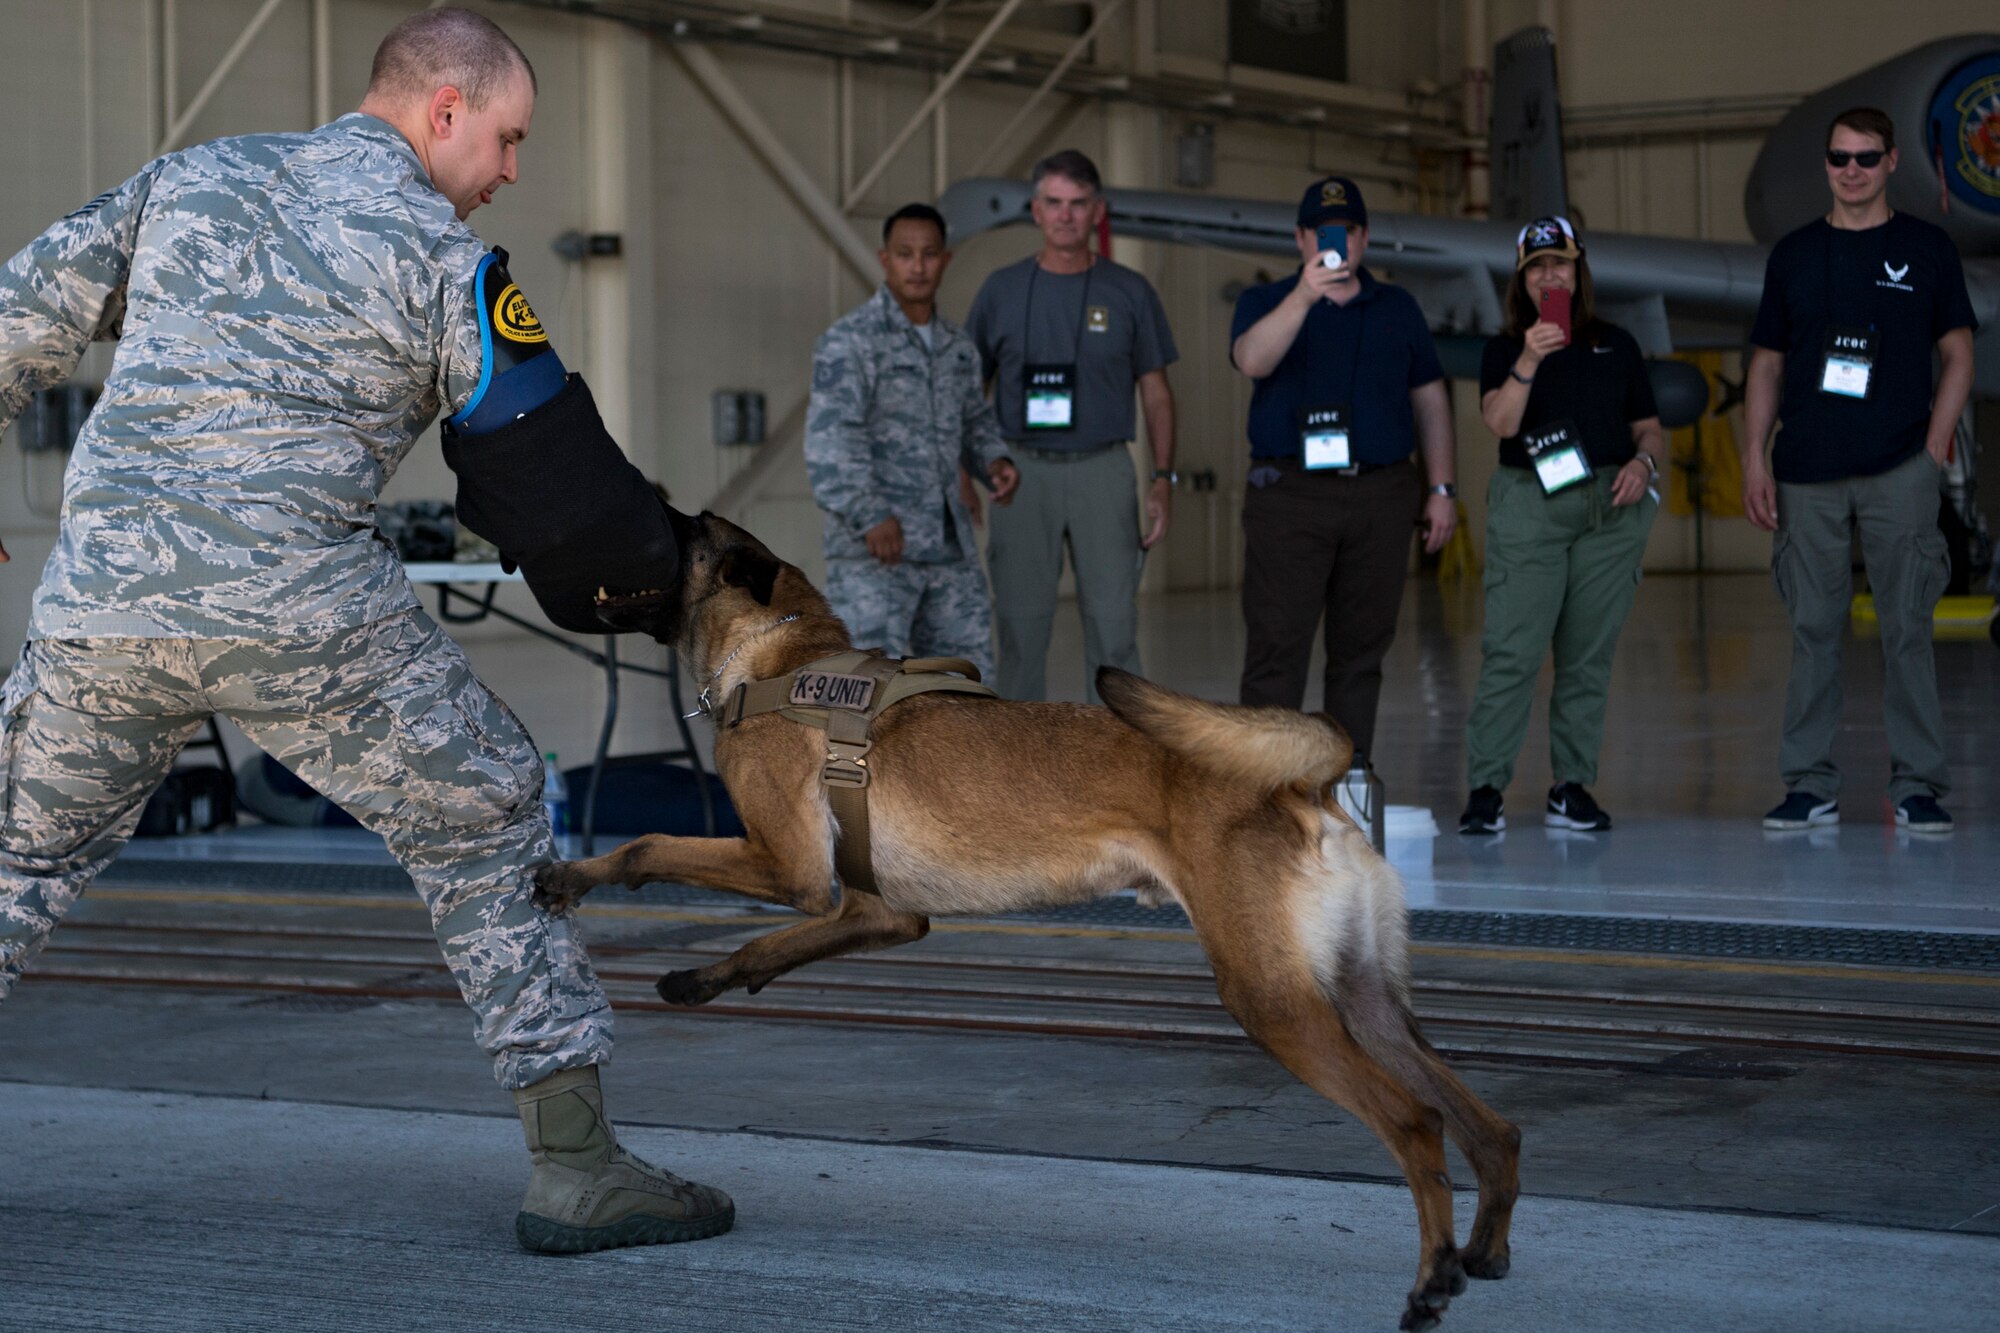 Military Working Dog (MWD) Ttoby bites Staff Sgt. Billy Benson, 23d Security Forces Squadron MWD handler, during the Joint Civilian Orientation Course 88 (JCOC), June 13, 2018, at Moody Air Force Base, Ga. The mission of JCOC is to increase the public’s understanding of the military through engagements between the armed forces and course members. (U.S. Air Force photo by Senior Airman Daniel Snider)